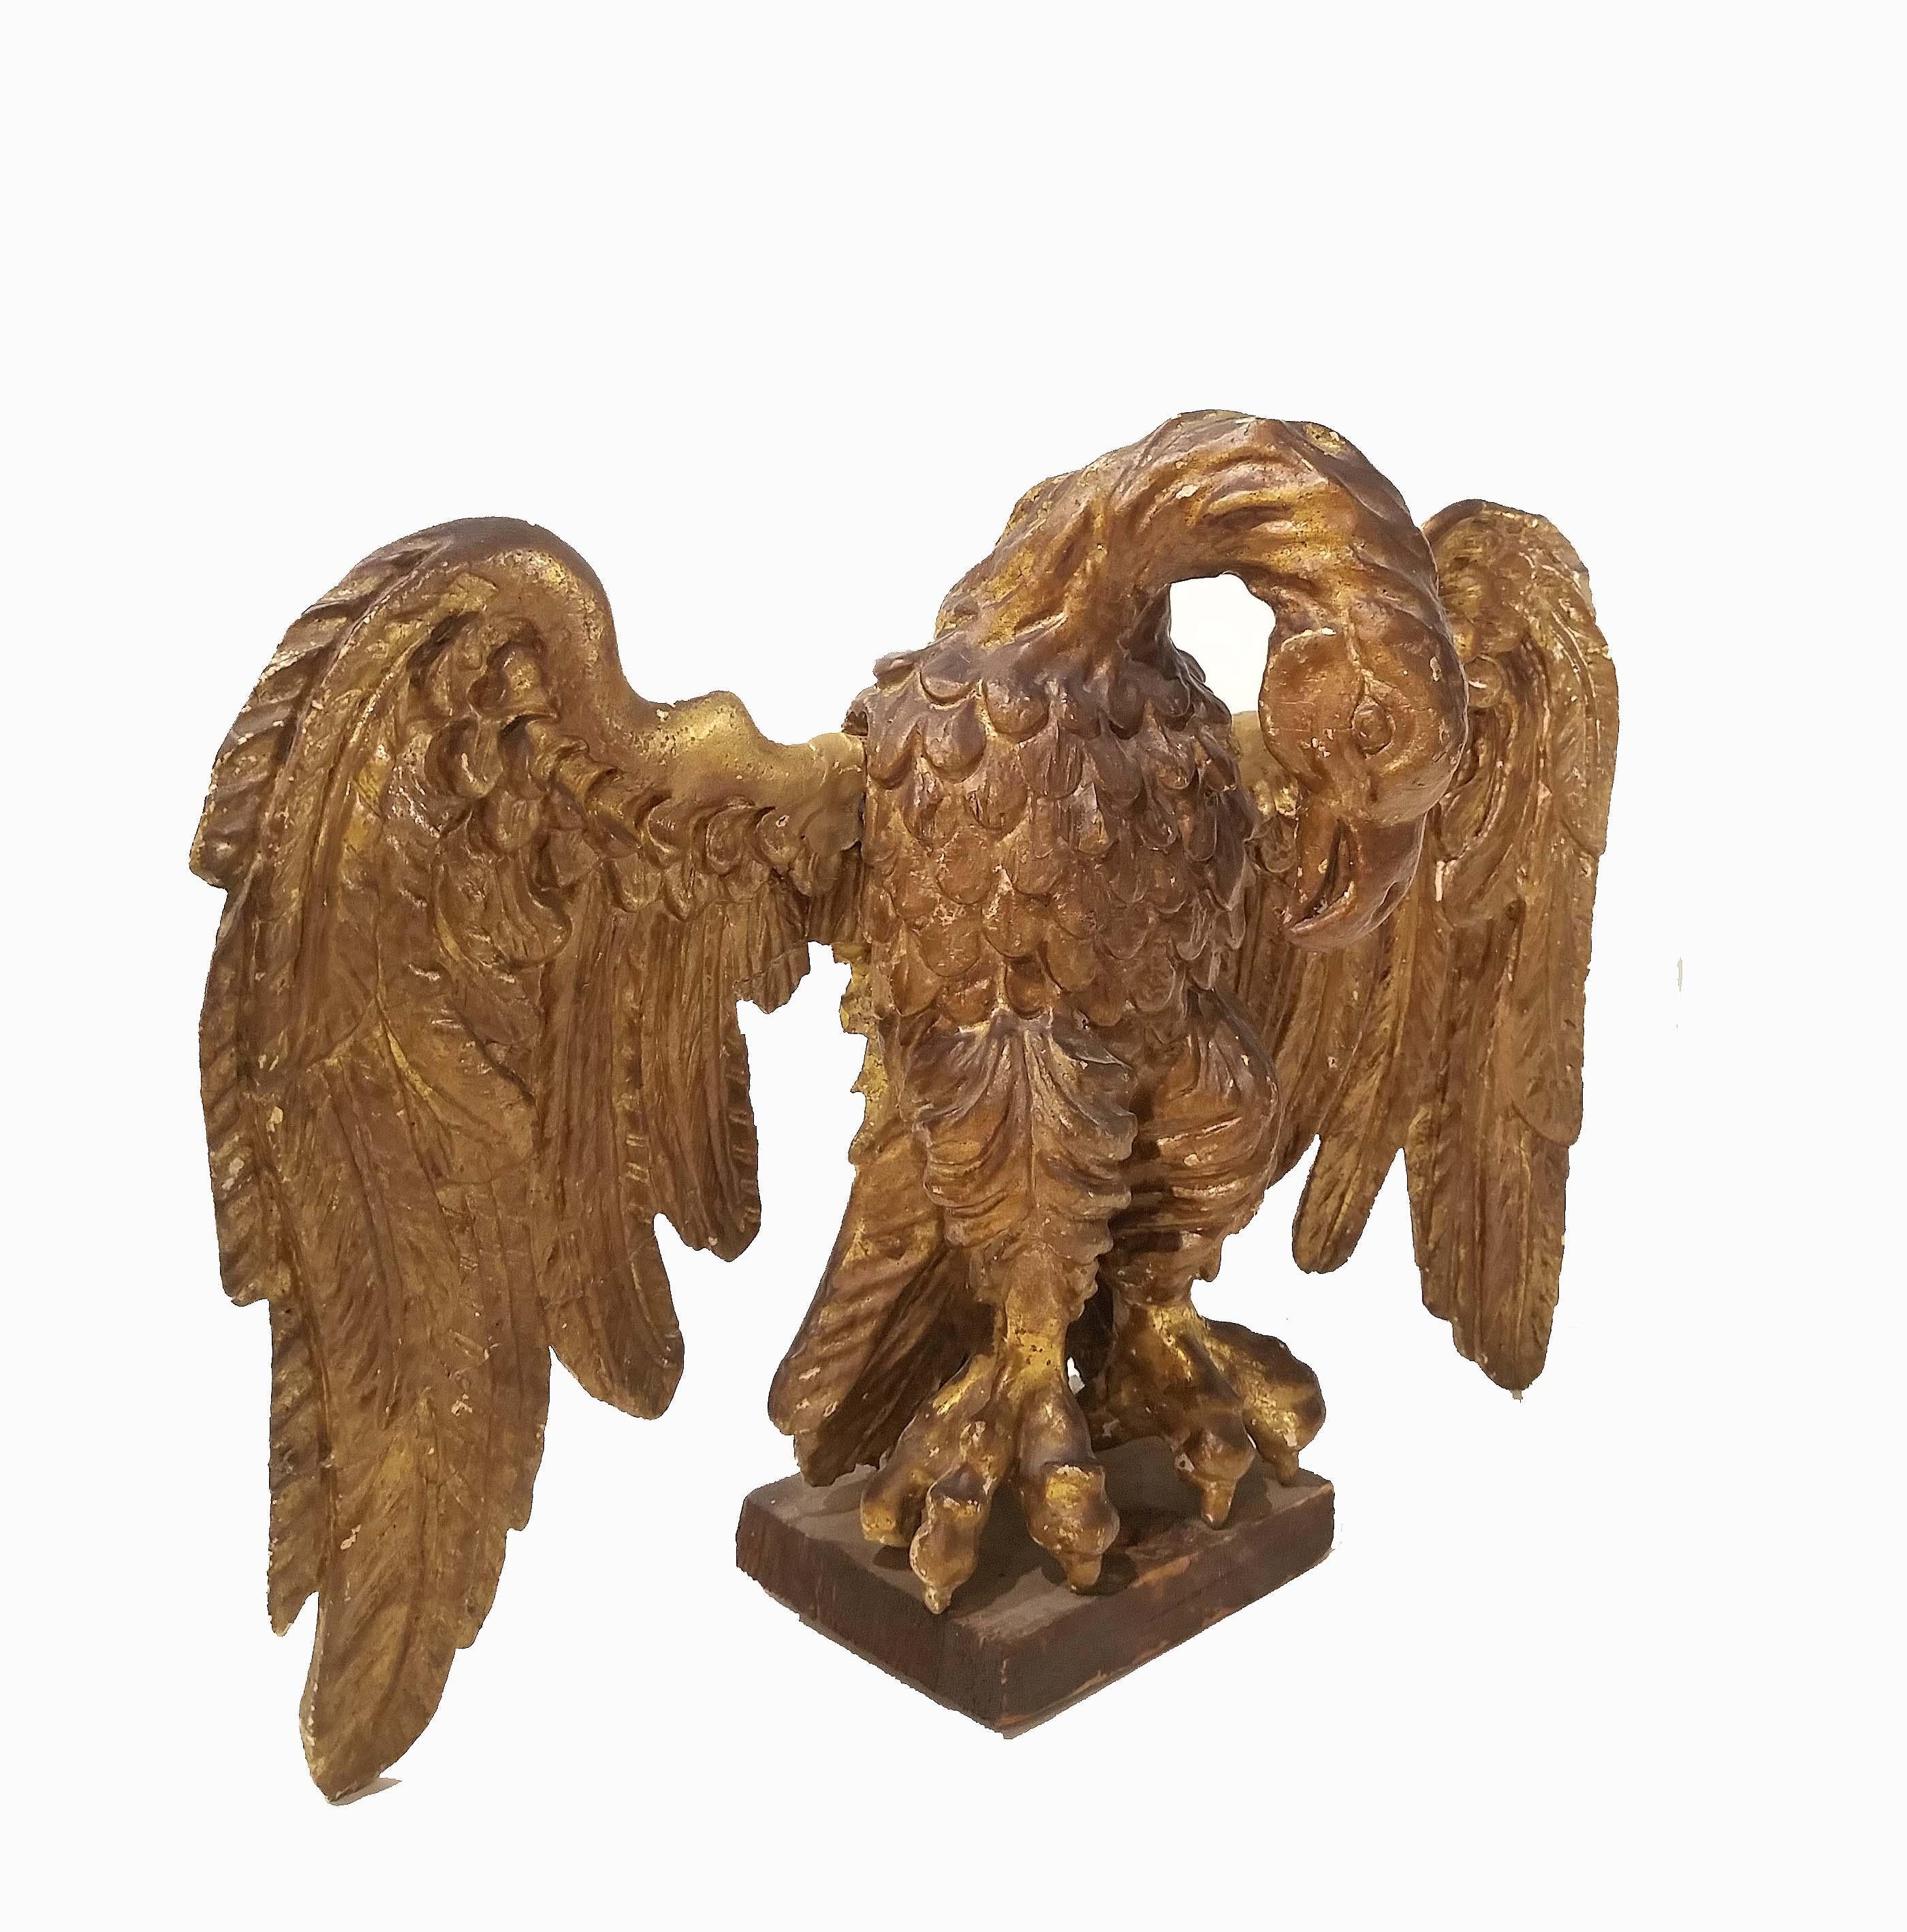 A wonderful carved wood, and gilded figure of an eagle circa mid-1600s.
Great quality carving and original gilding.